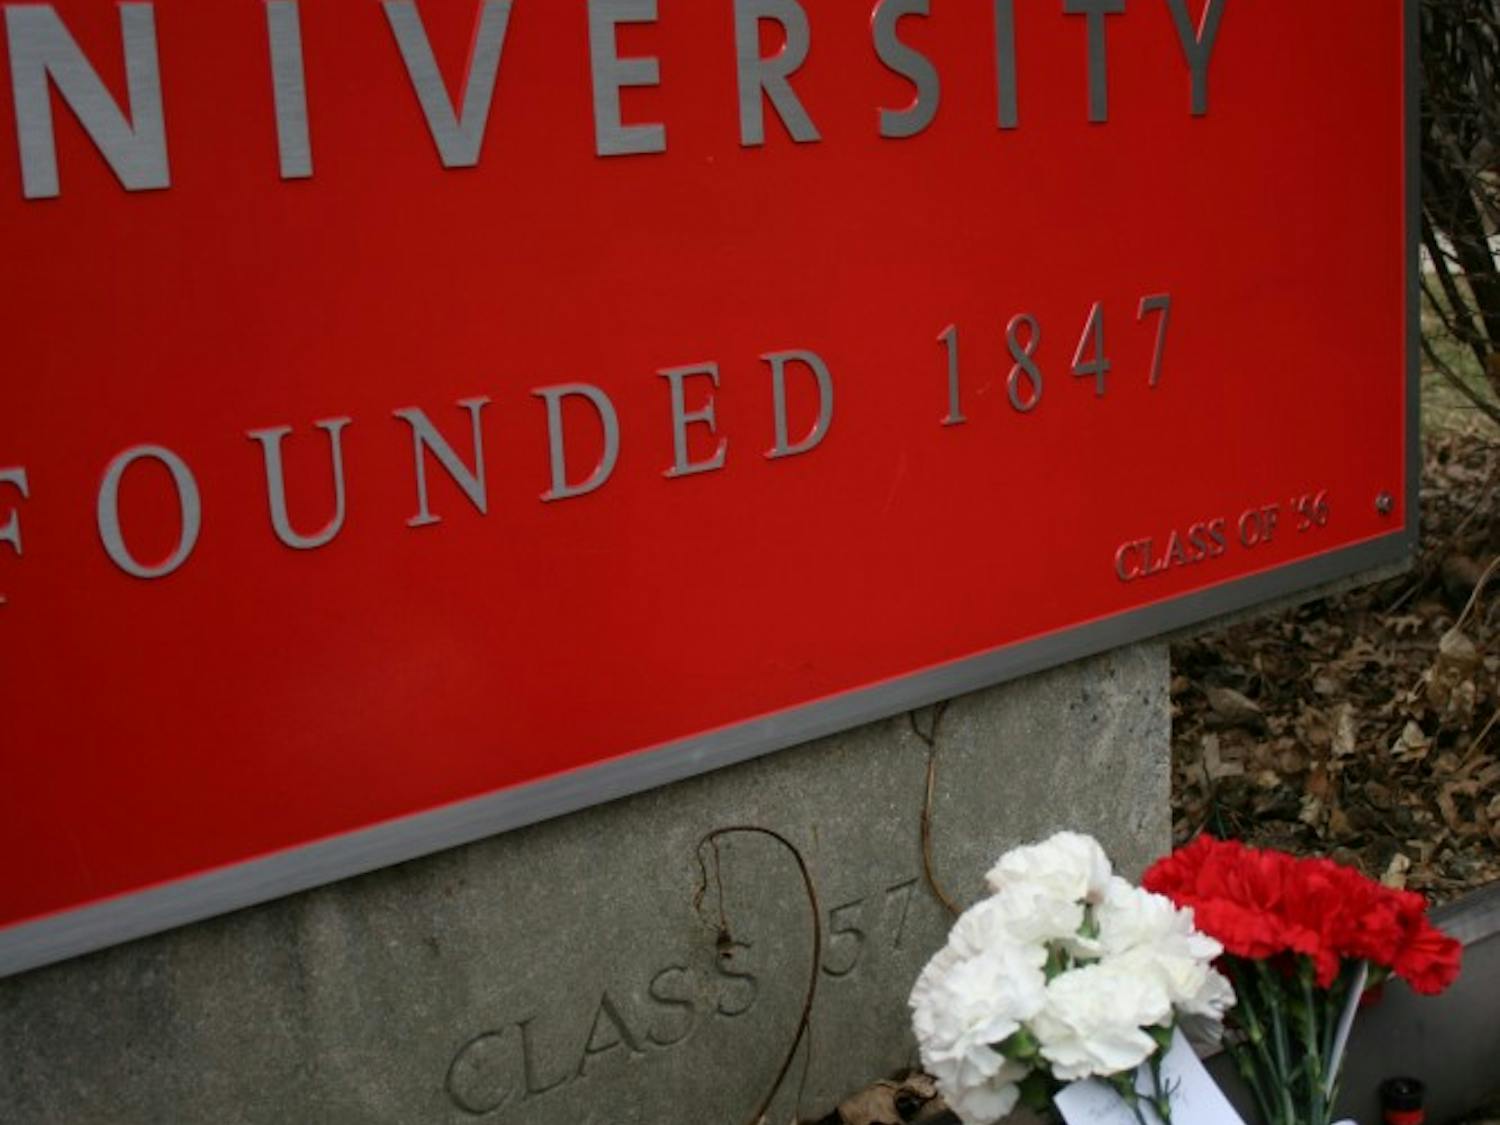 	In memoriam of Kyle Miller: Flowers had been placed by the Otterbein sign on Towers&#8217; lawn. 